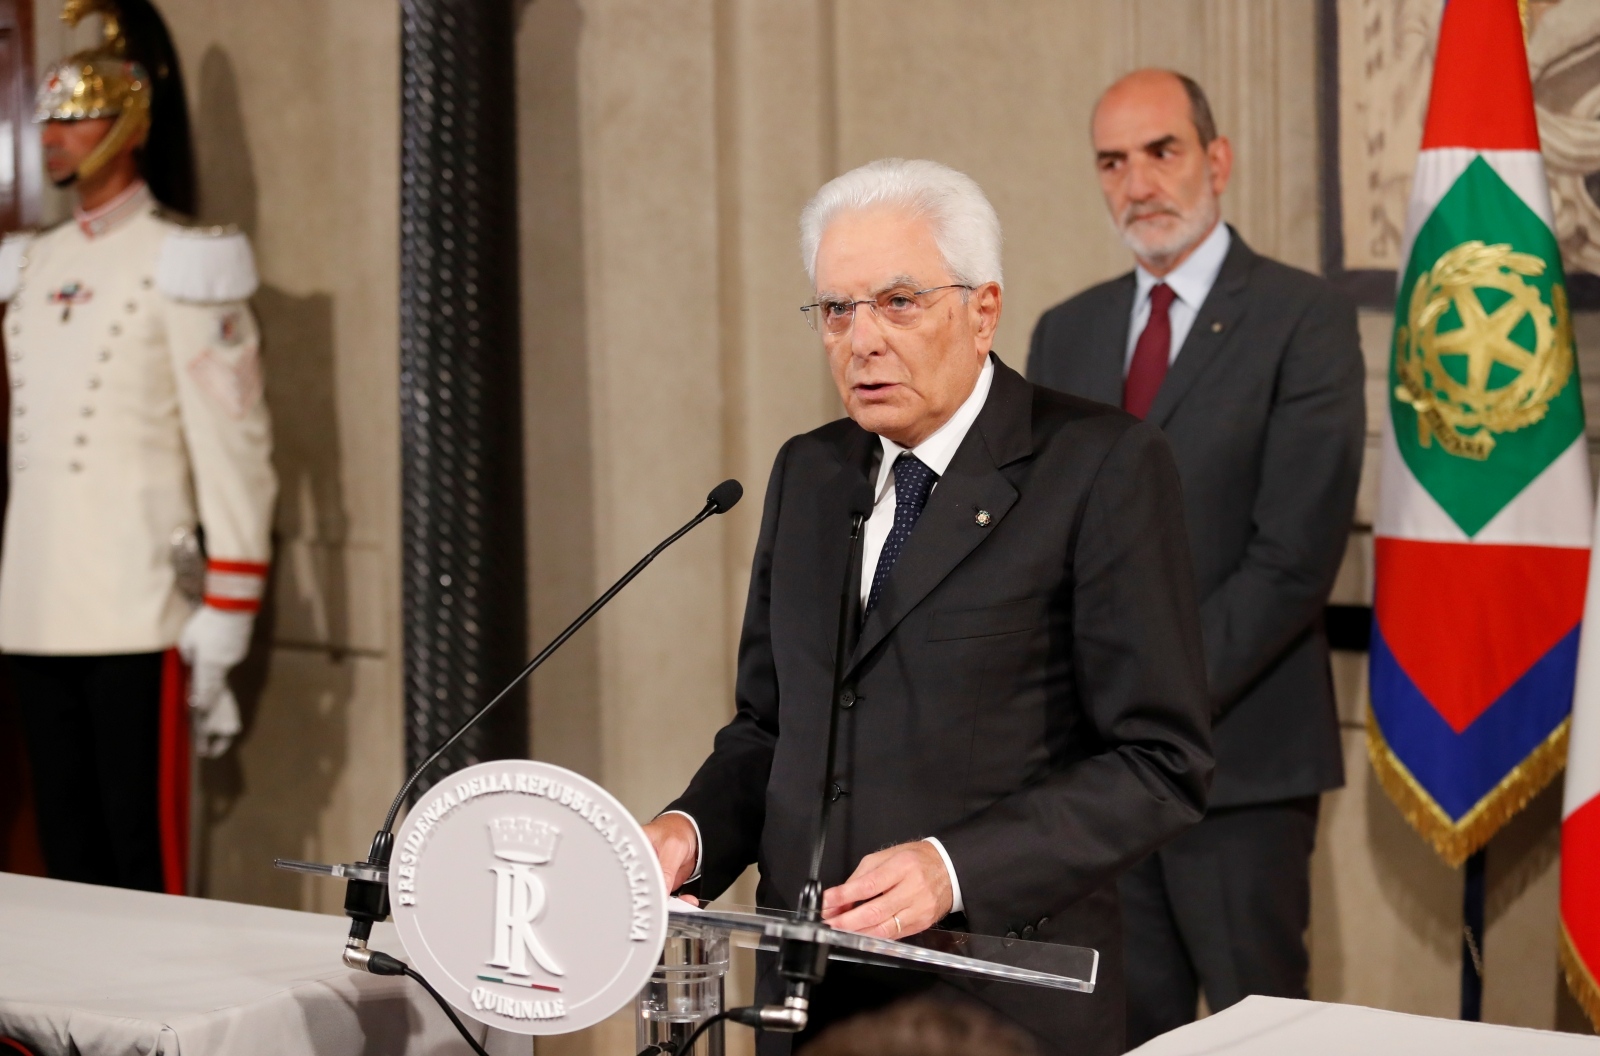 Italian President Sergio Mattarella holds consultations on political crisis in Rome Italian President Sergio Mattarella speaks to the media following a day of consultations at the Presidential Palace in Rome, Italy, August 22, 2019. REUTERS/Remo Casilli REMO CASILLI